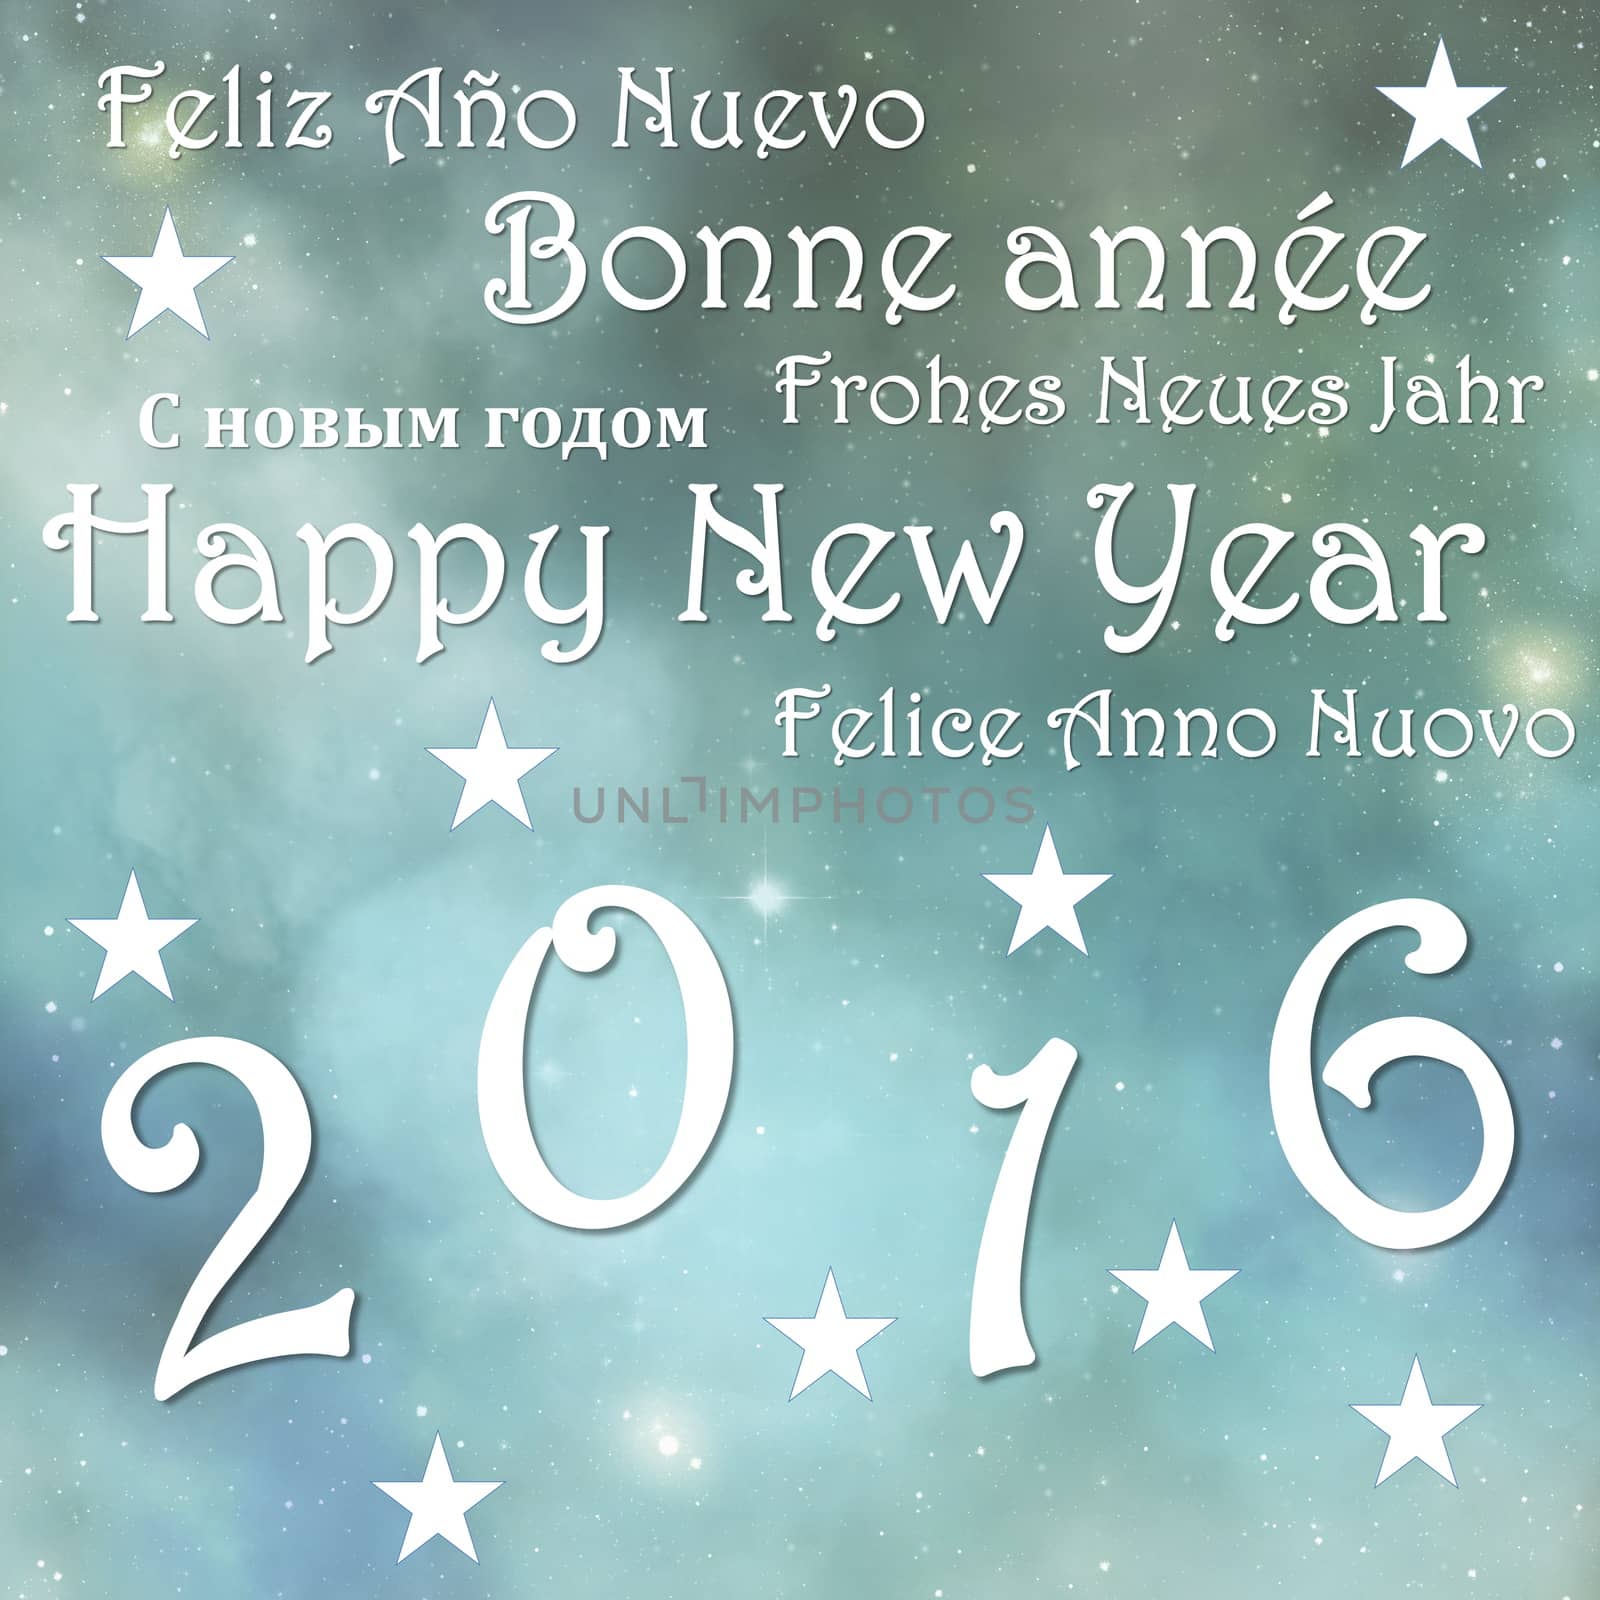 Happy new year 2016 - 3D render by Elenaphotos21